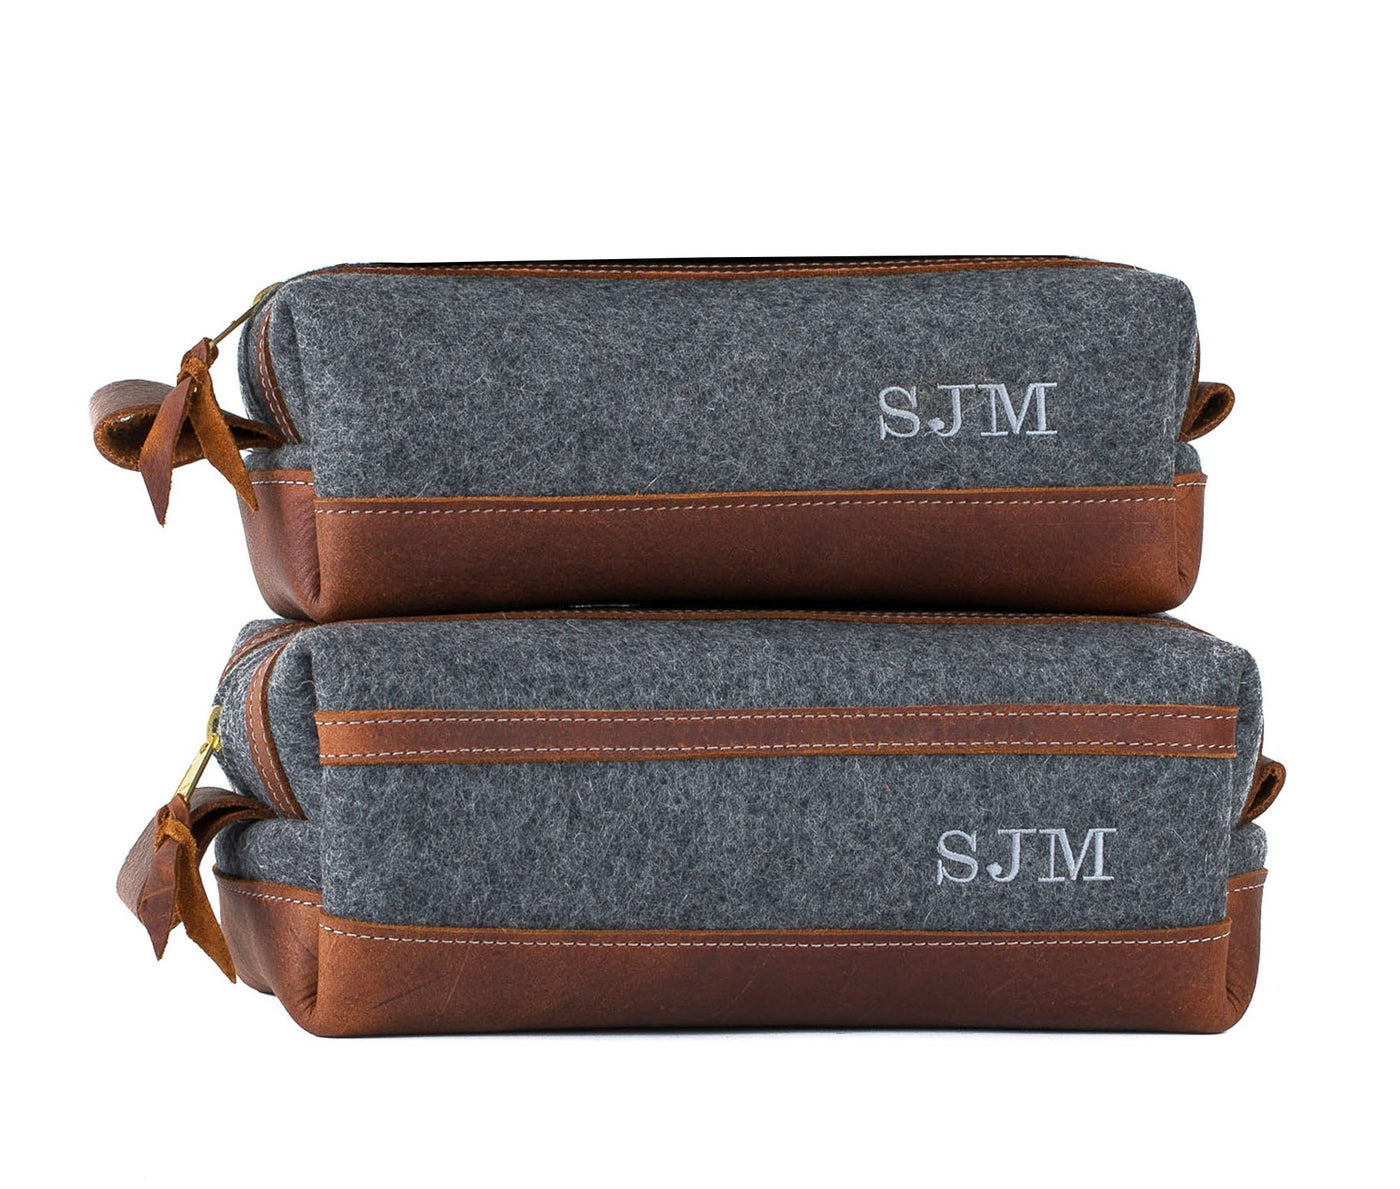 Felt & Leather Toiletry Bag by Lifetime Leather Co